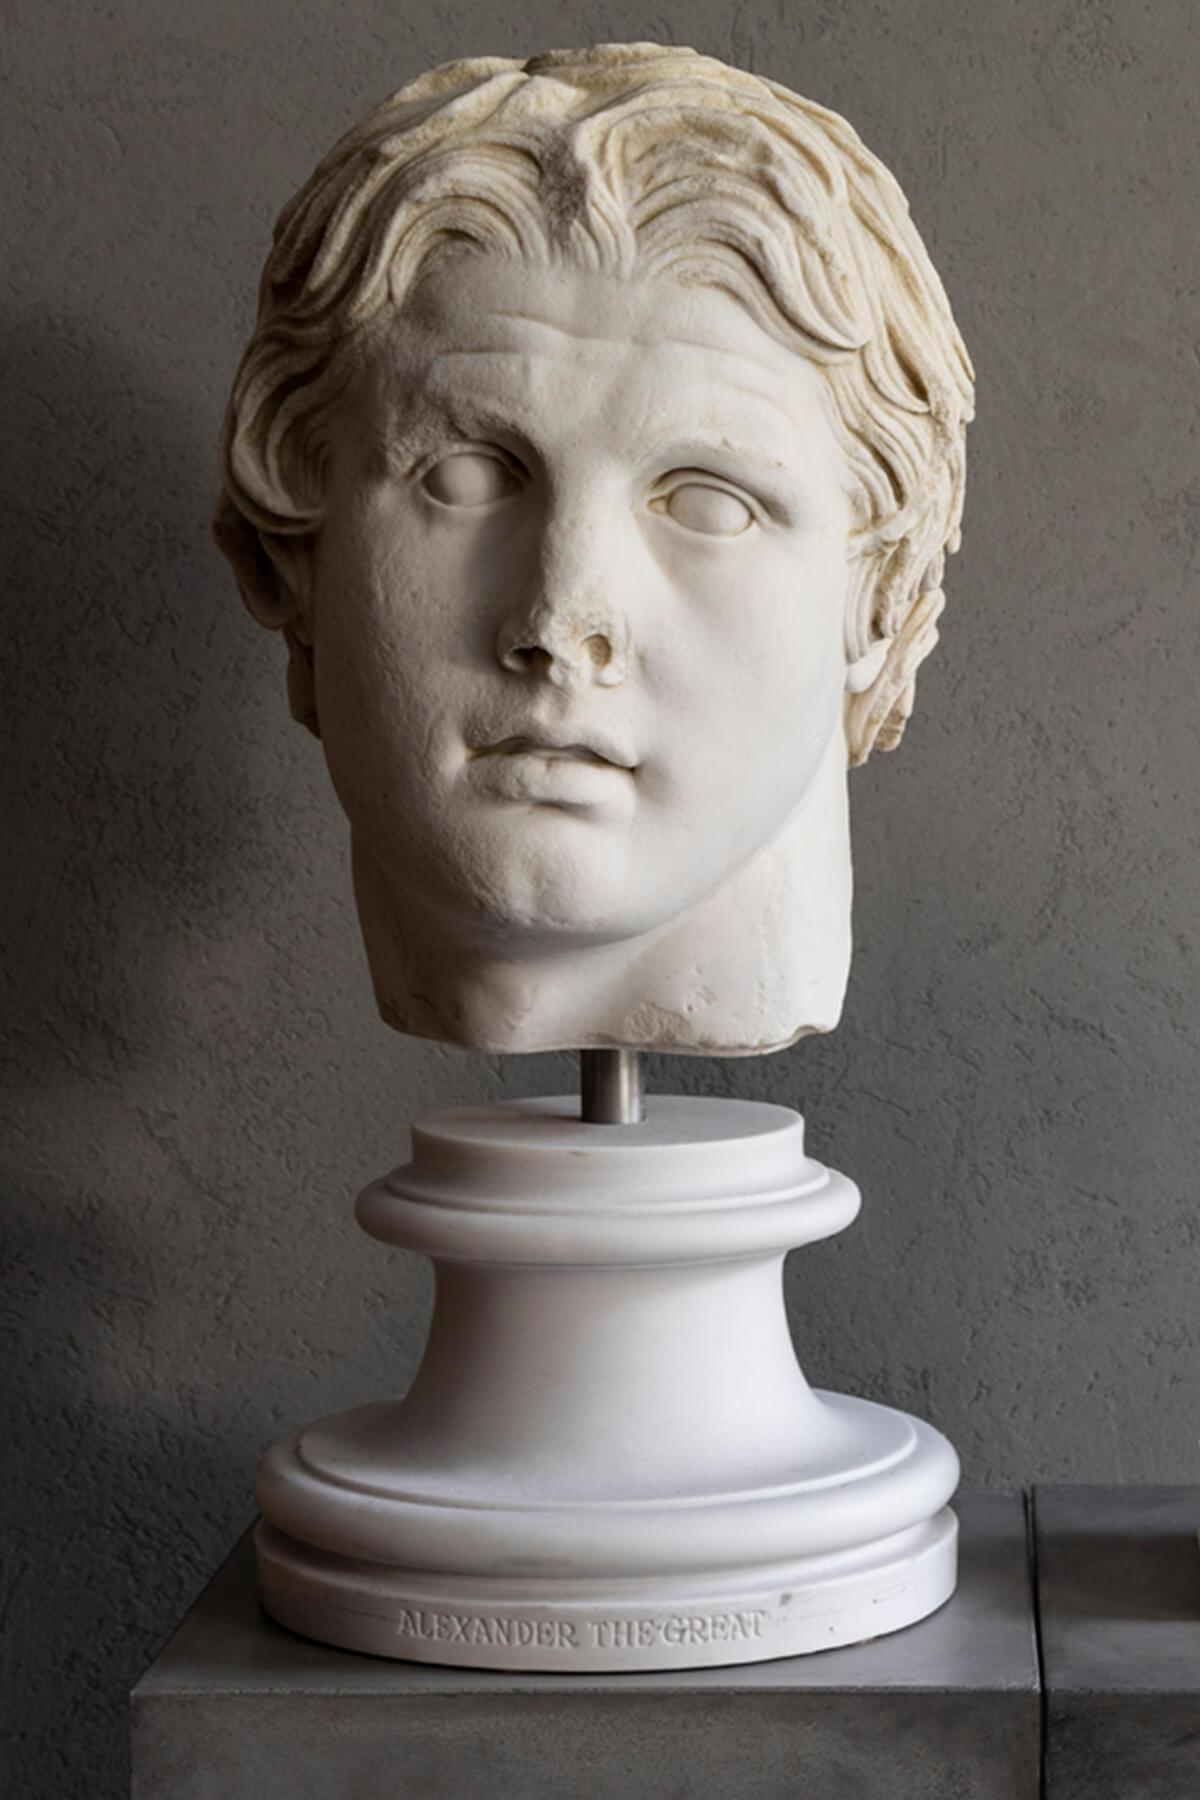 Height: 56 cm / Weight: 20 kg

Alexander, the real name of Macedonian III. Alexandros, commonly known as Alexander the Great, was king of the ancient Greek kingdom of Macedonia and a member of the Argead dynasty. He was born in Pella in 356 BC,